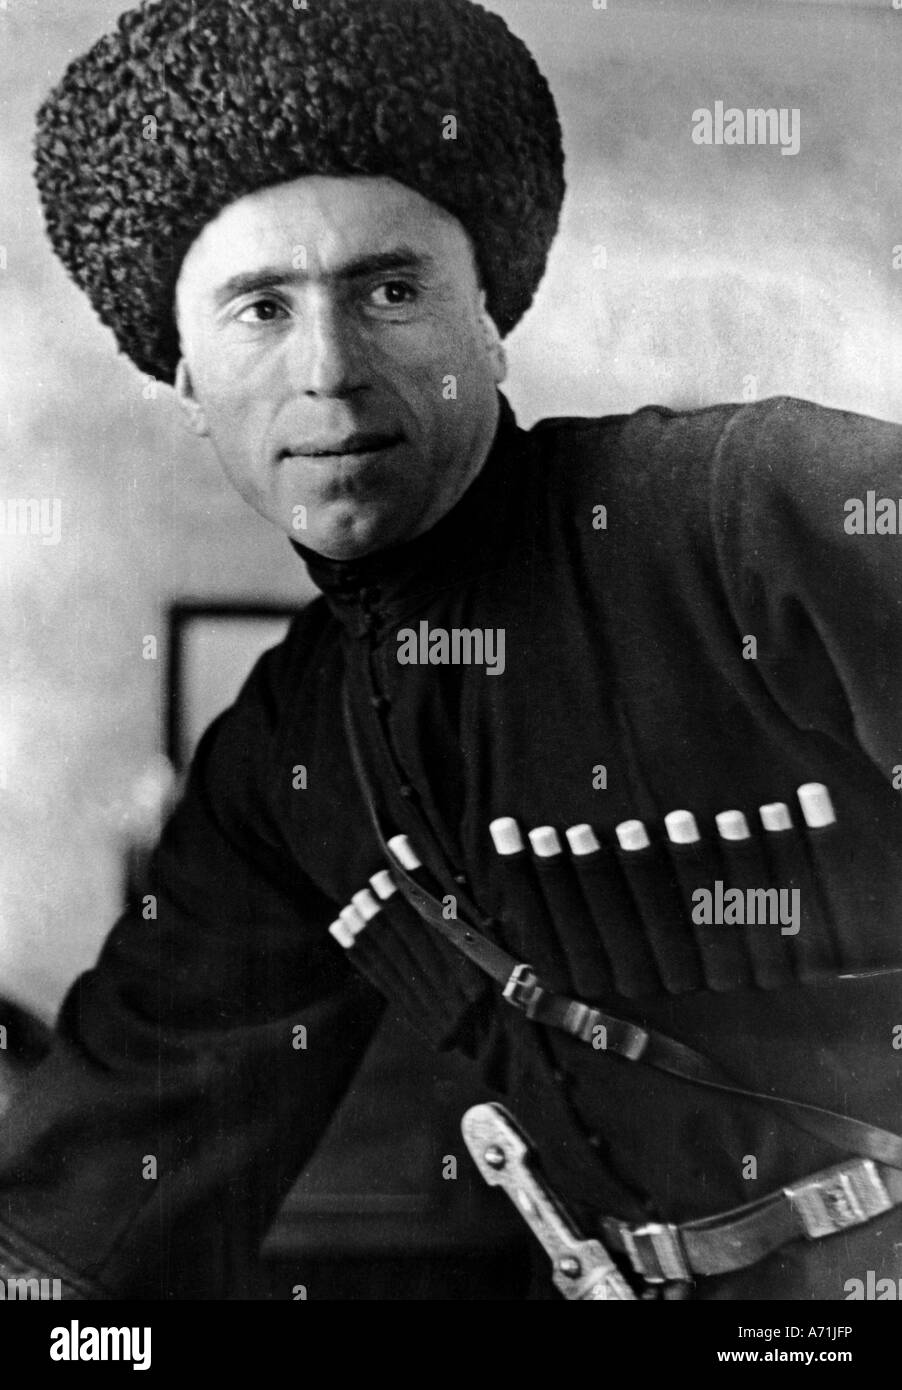 events, Second World War / WWII, foreigners in German service, cossacks, cossack officer, Russia, 1943, Stock Photo